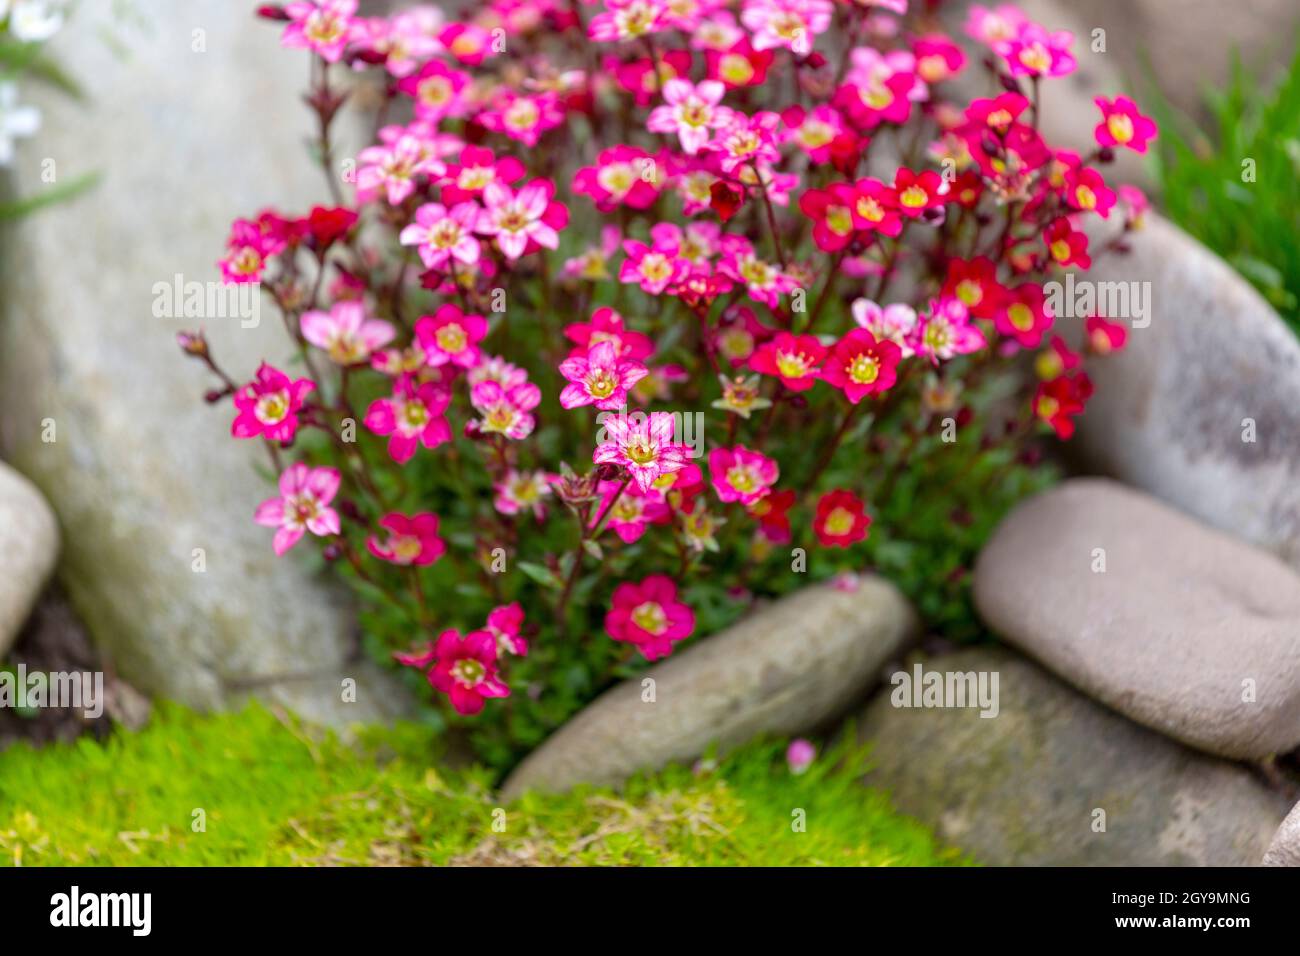 Red spring flowers of saxifraga × arendsii blooming in rock garden, close up Stock Photo